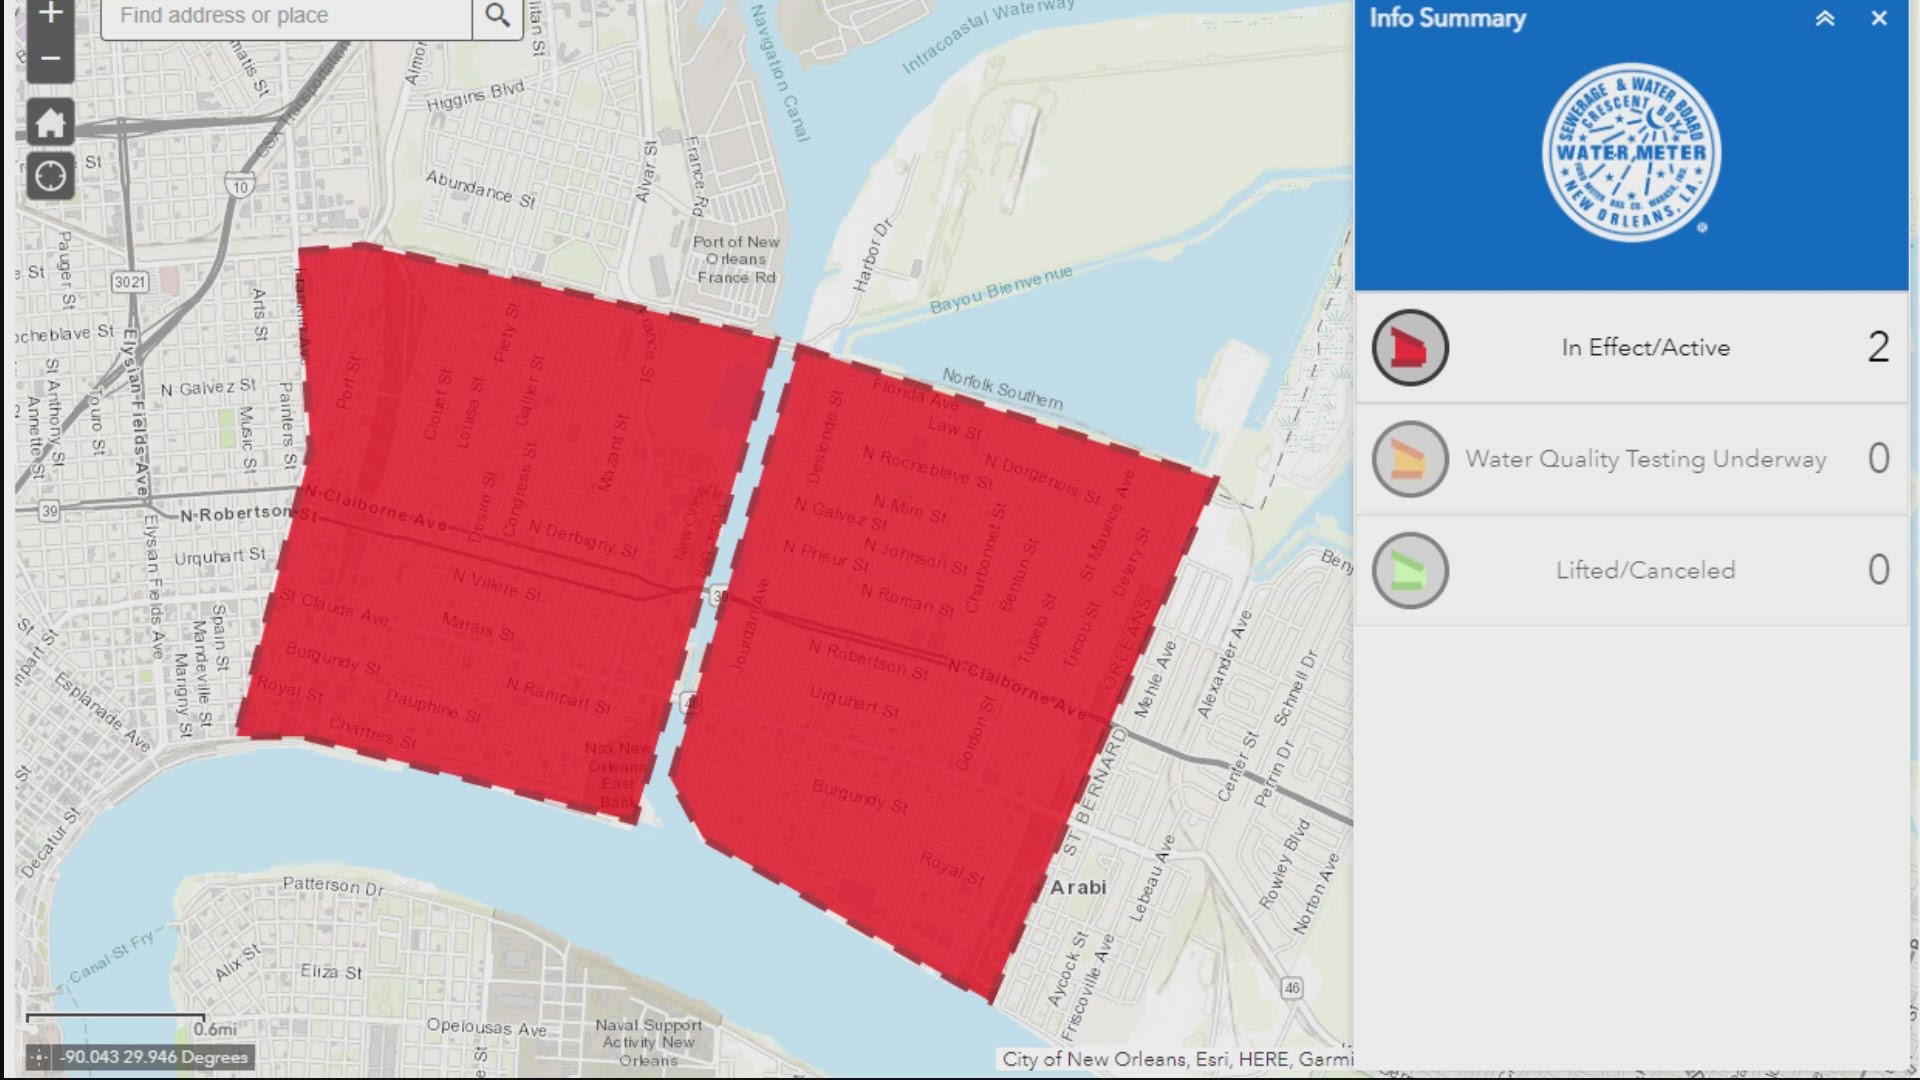 A boil water advisory is in effect for the entire lower 9th Ward, Holy Cross, Bywater, along with St. Claude and Florida area.